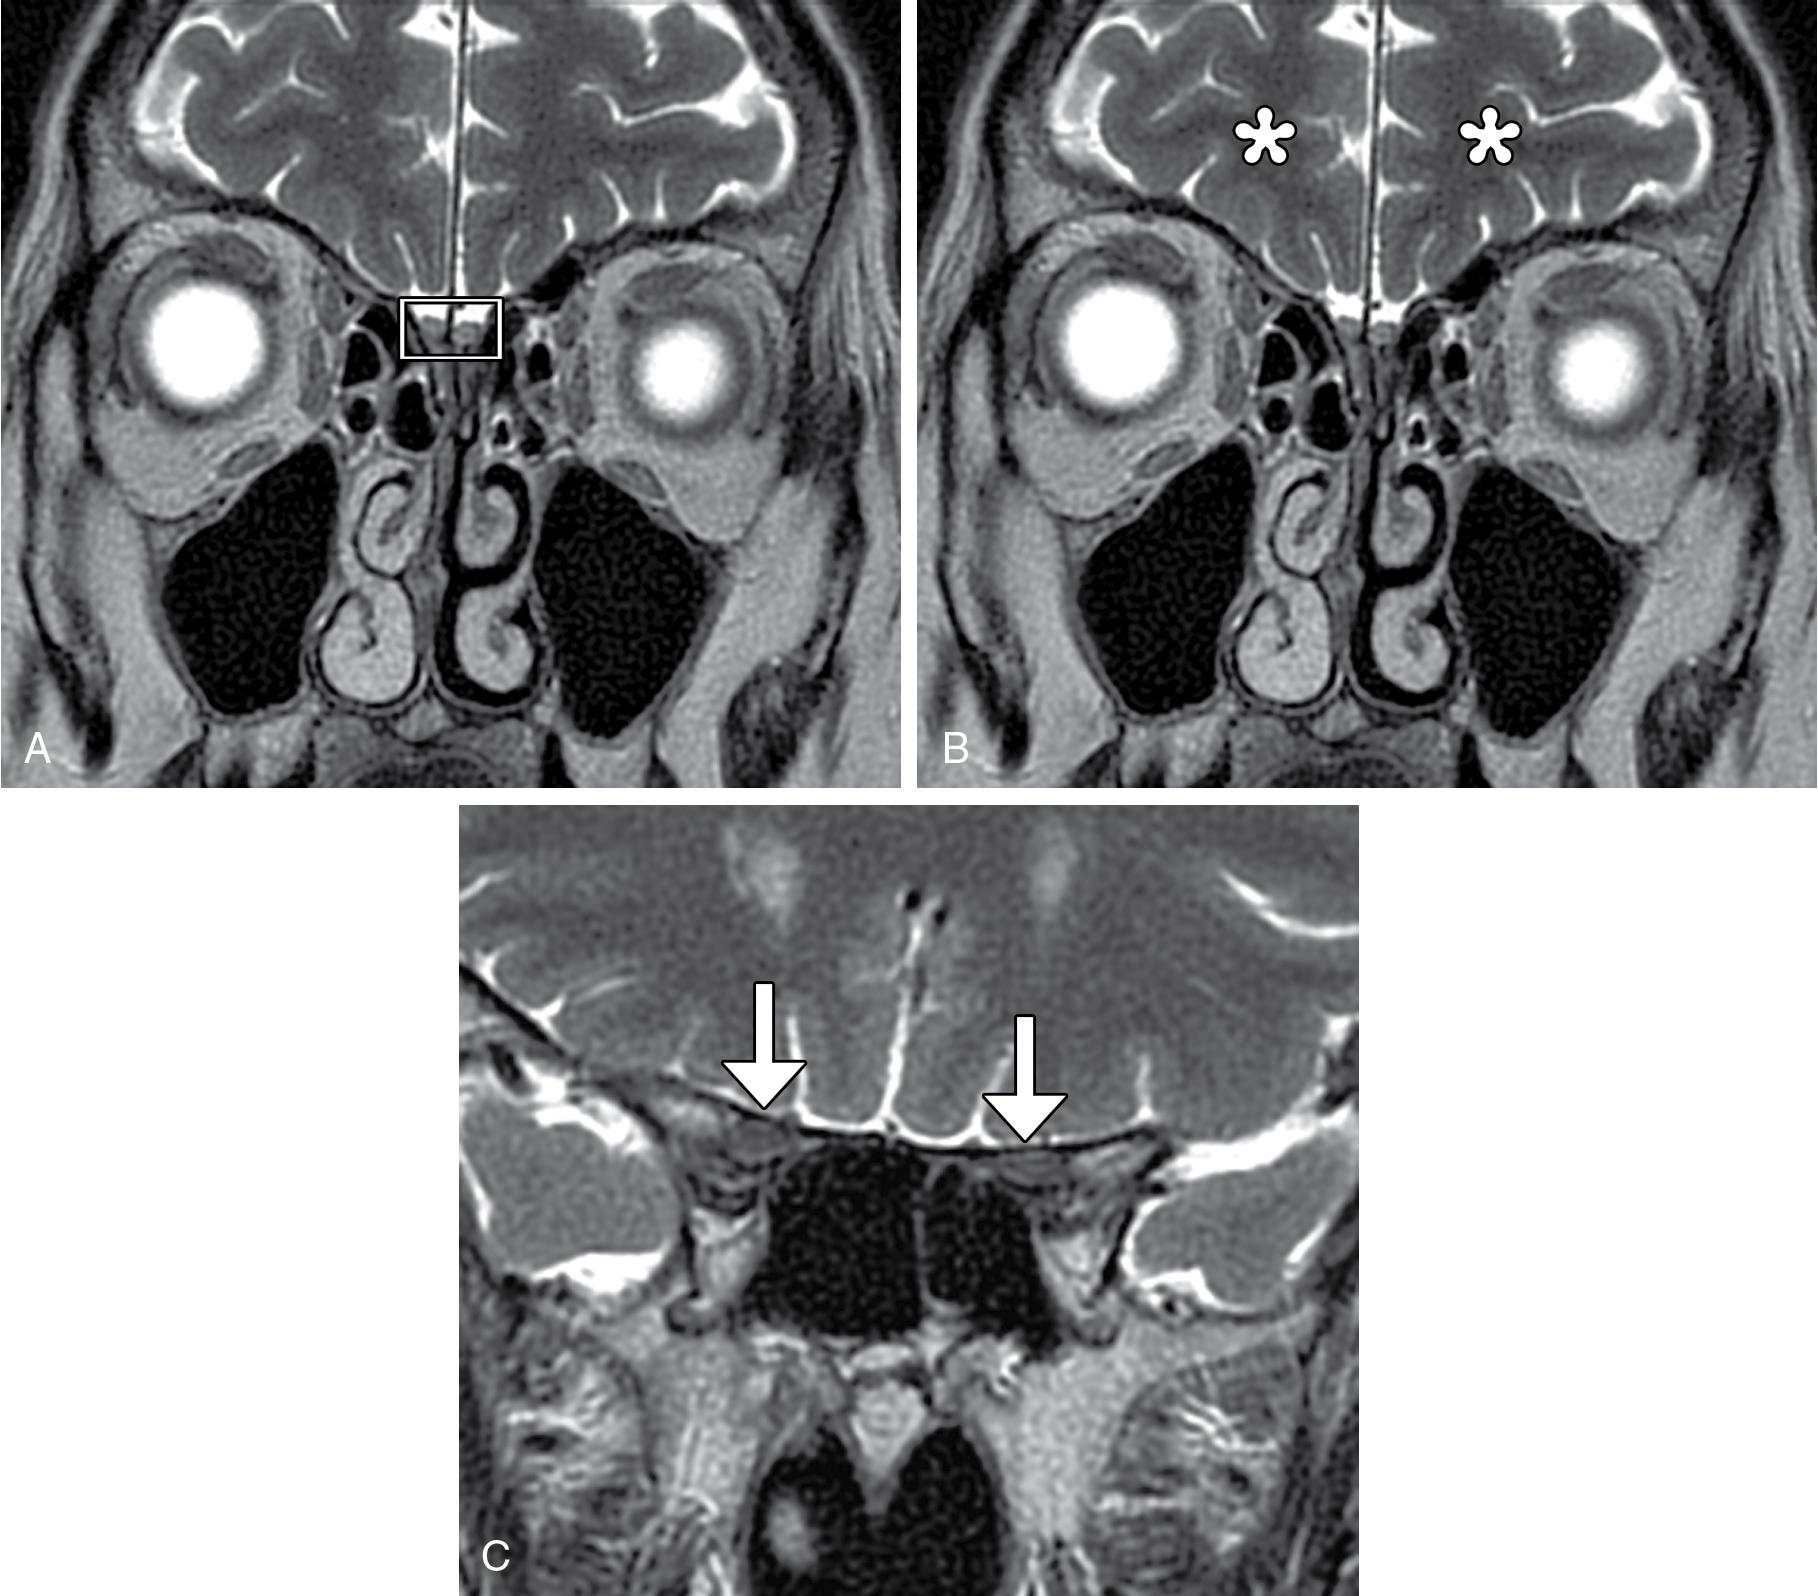 Fig. 11.2, Coronal T2-weighted magnetic resonance images show the olfactory bulbs (box) ( A ), frontal lobes (*) ( B ), and optic nerves in the optic canals (arrows) ( C ).